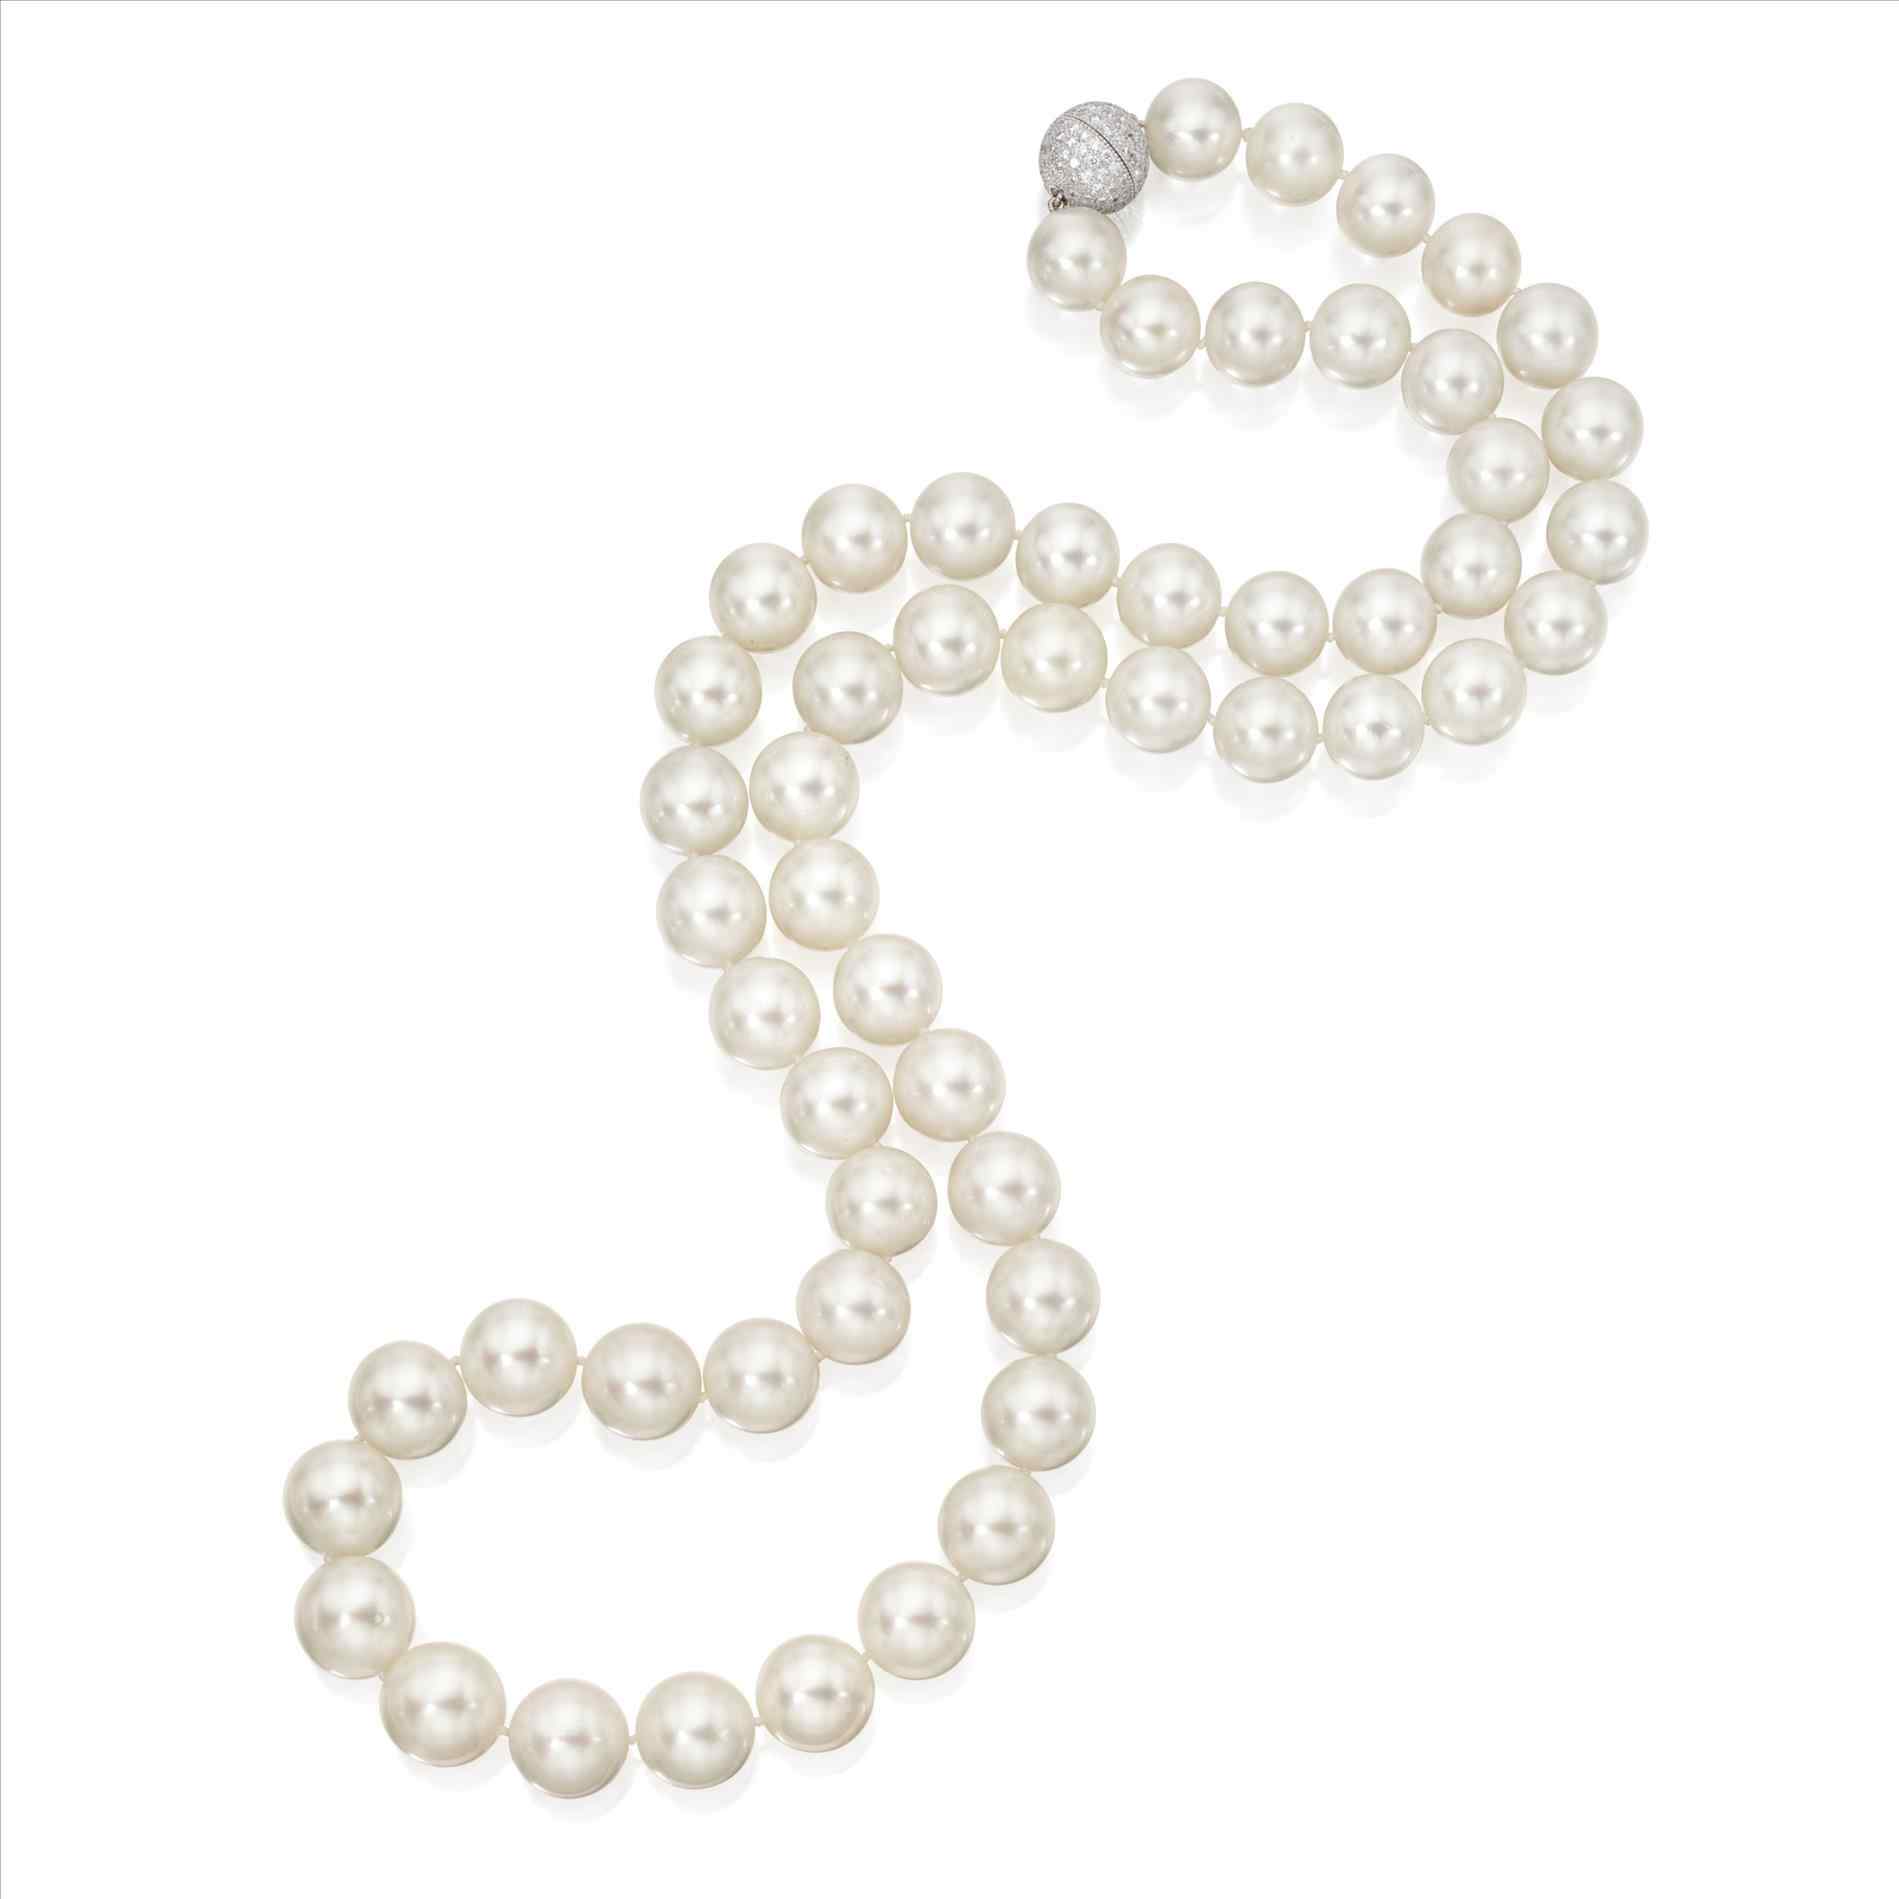 String Of Beads PNG - 141371